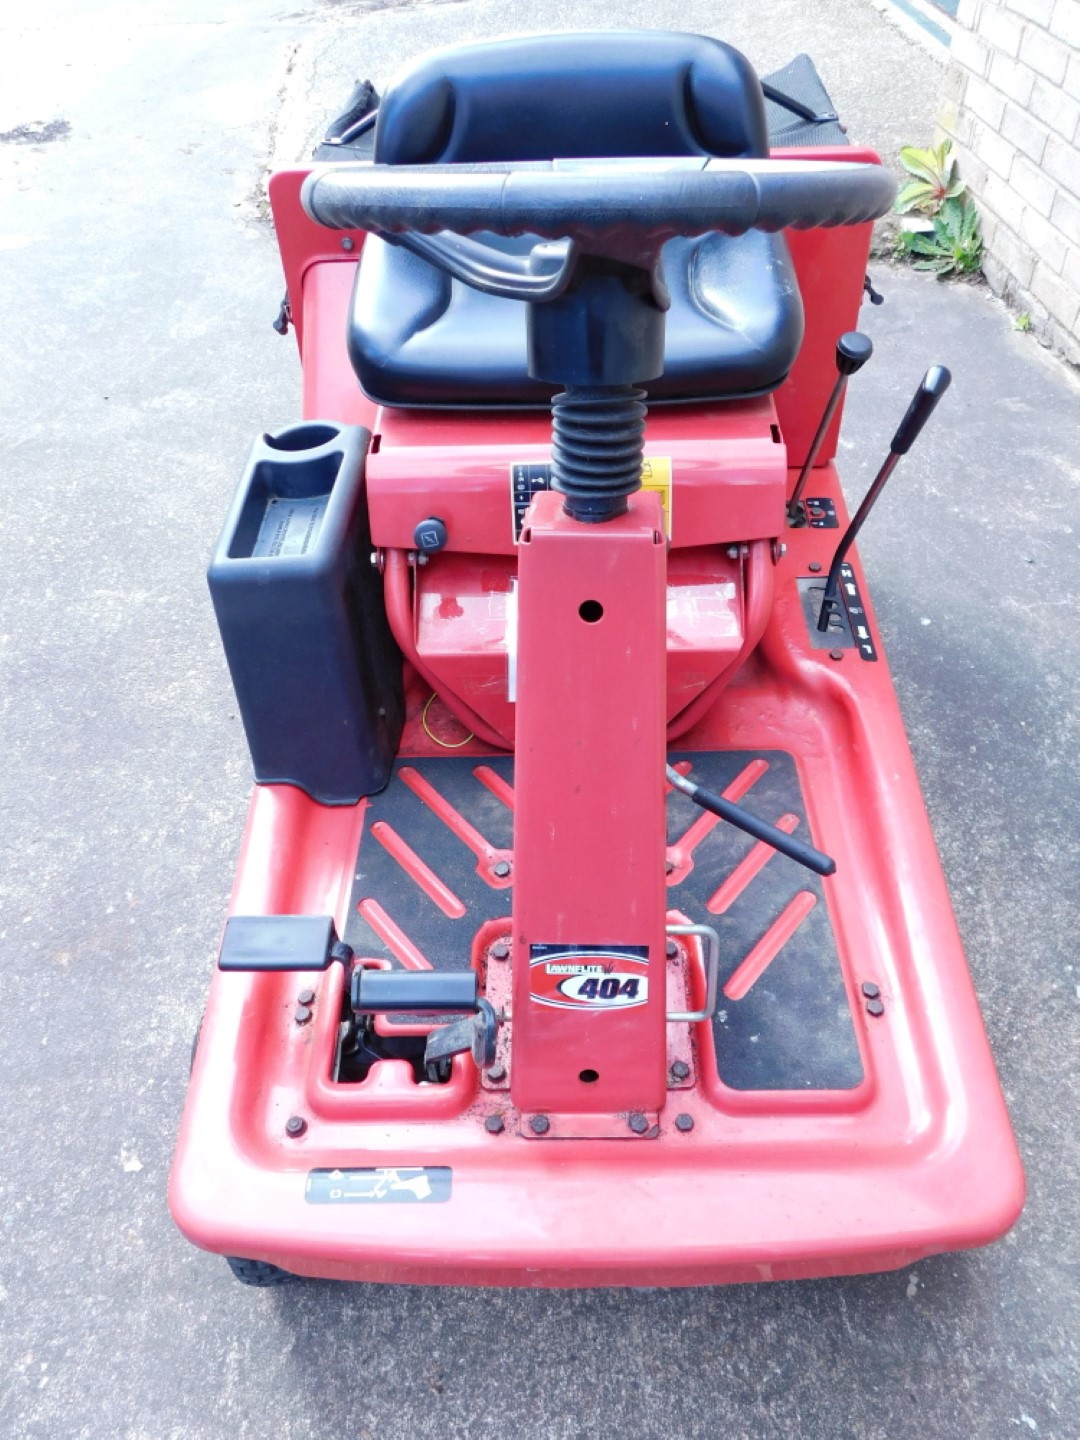 A Lawnflite 404 petrol ride on mower, in red. - Image 2 of 5